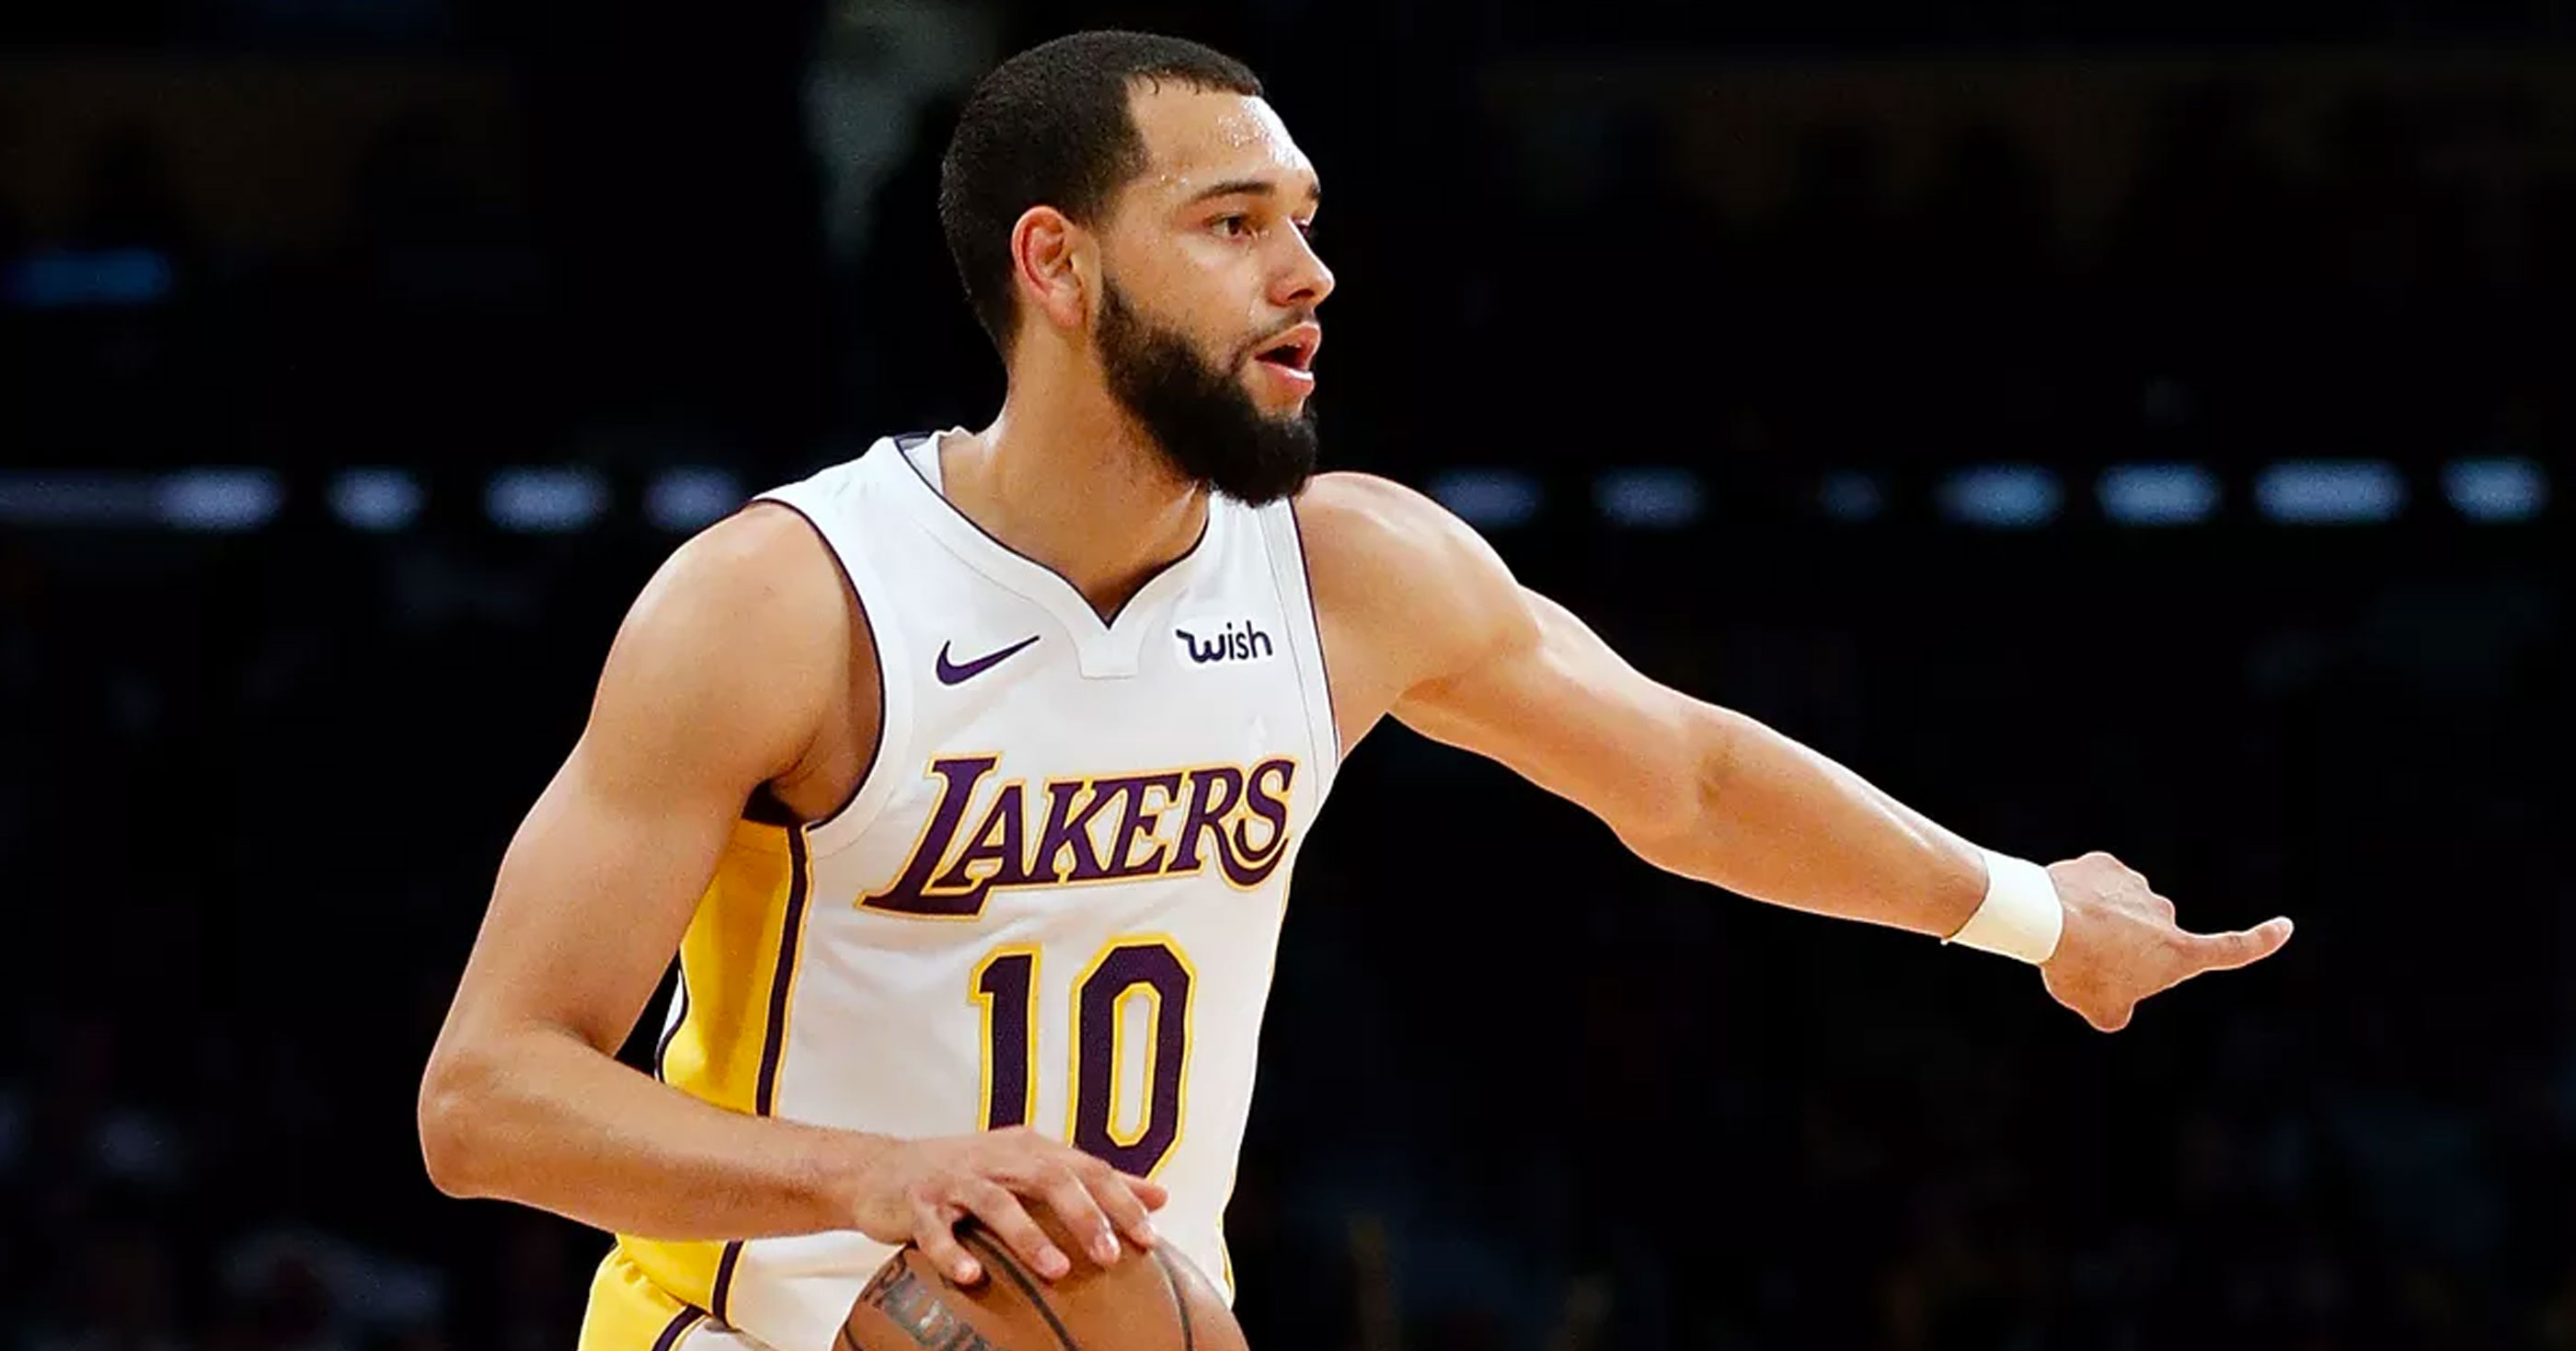 LOOK: NBA's new Nike jersey gets torn off Tyler Ennis during